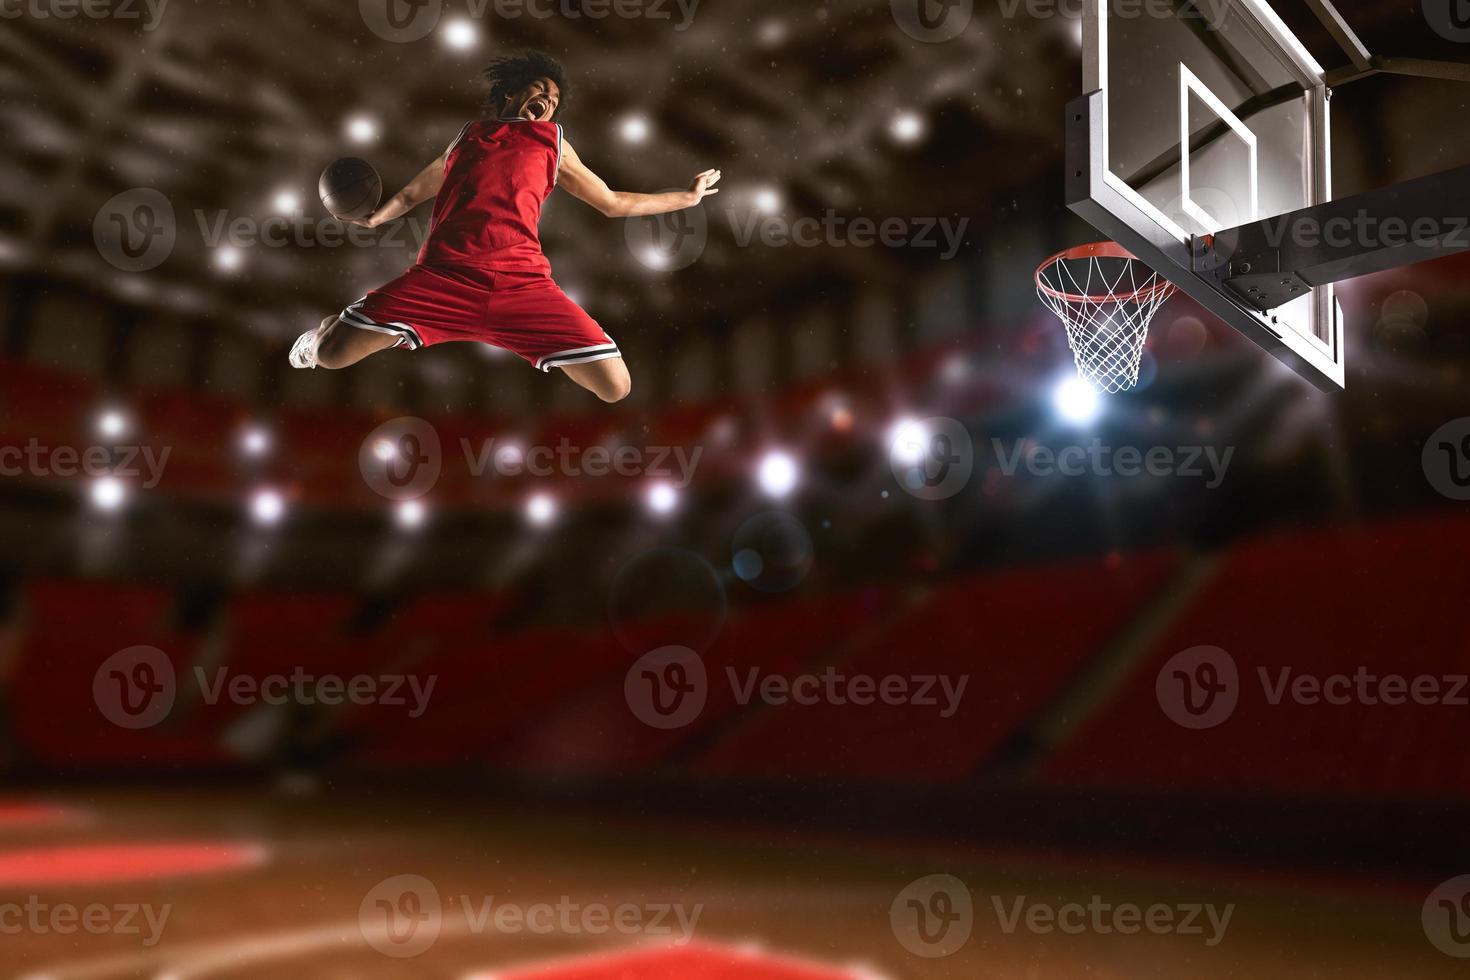 Basketball game with a high jump player to make a slam dunk to the basket photo